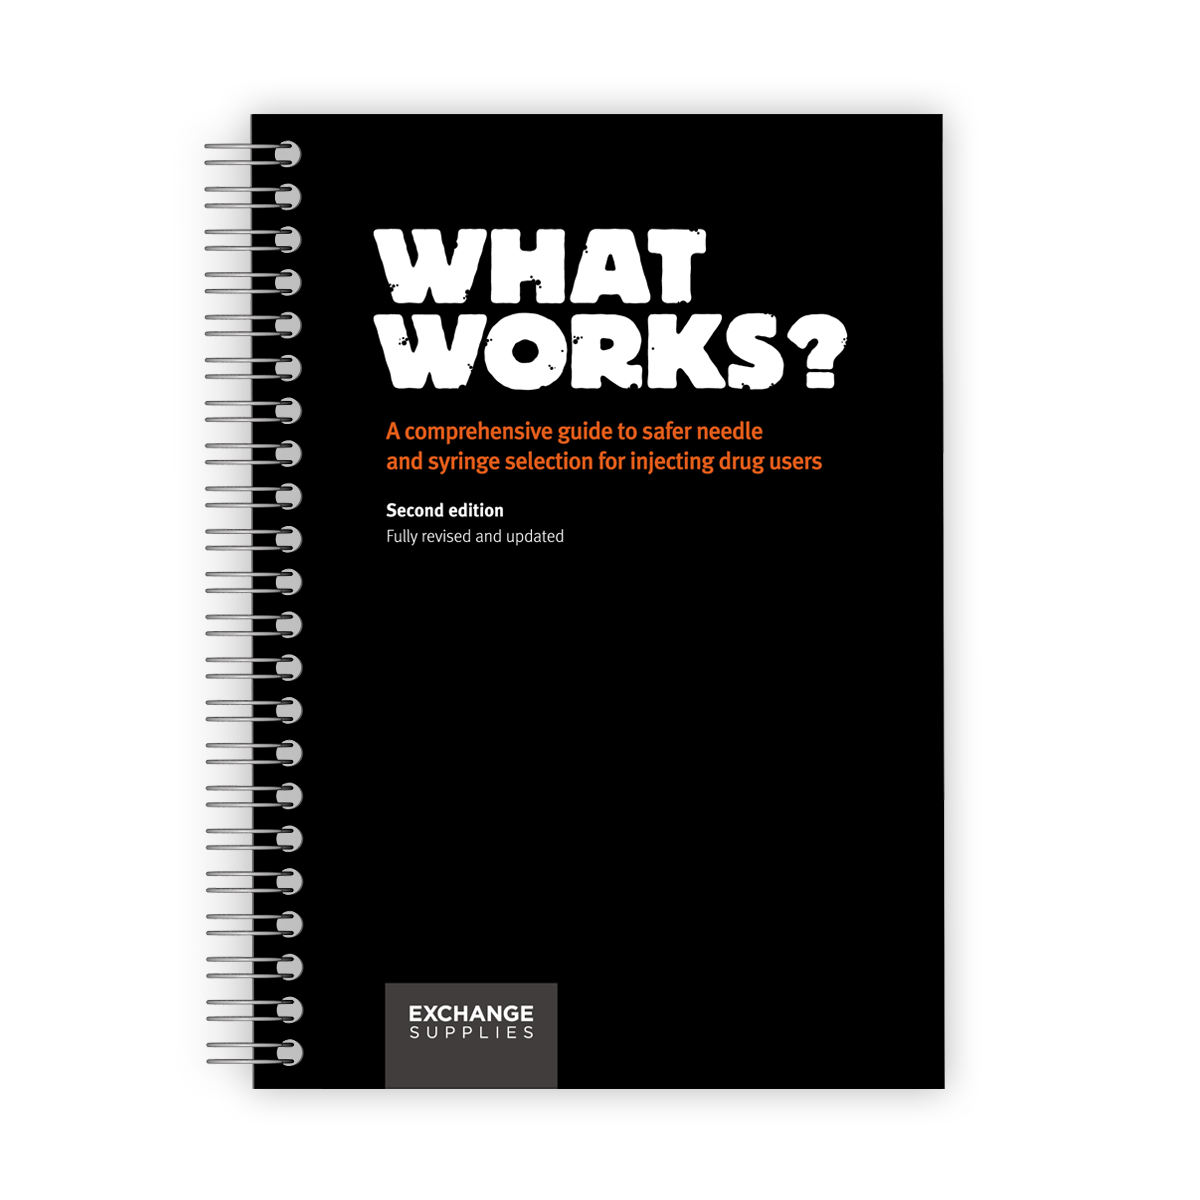 'What Works?' - A guide to injecting equipment (2nd Edition)